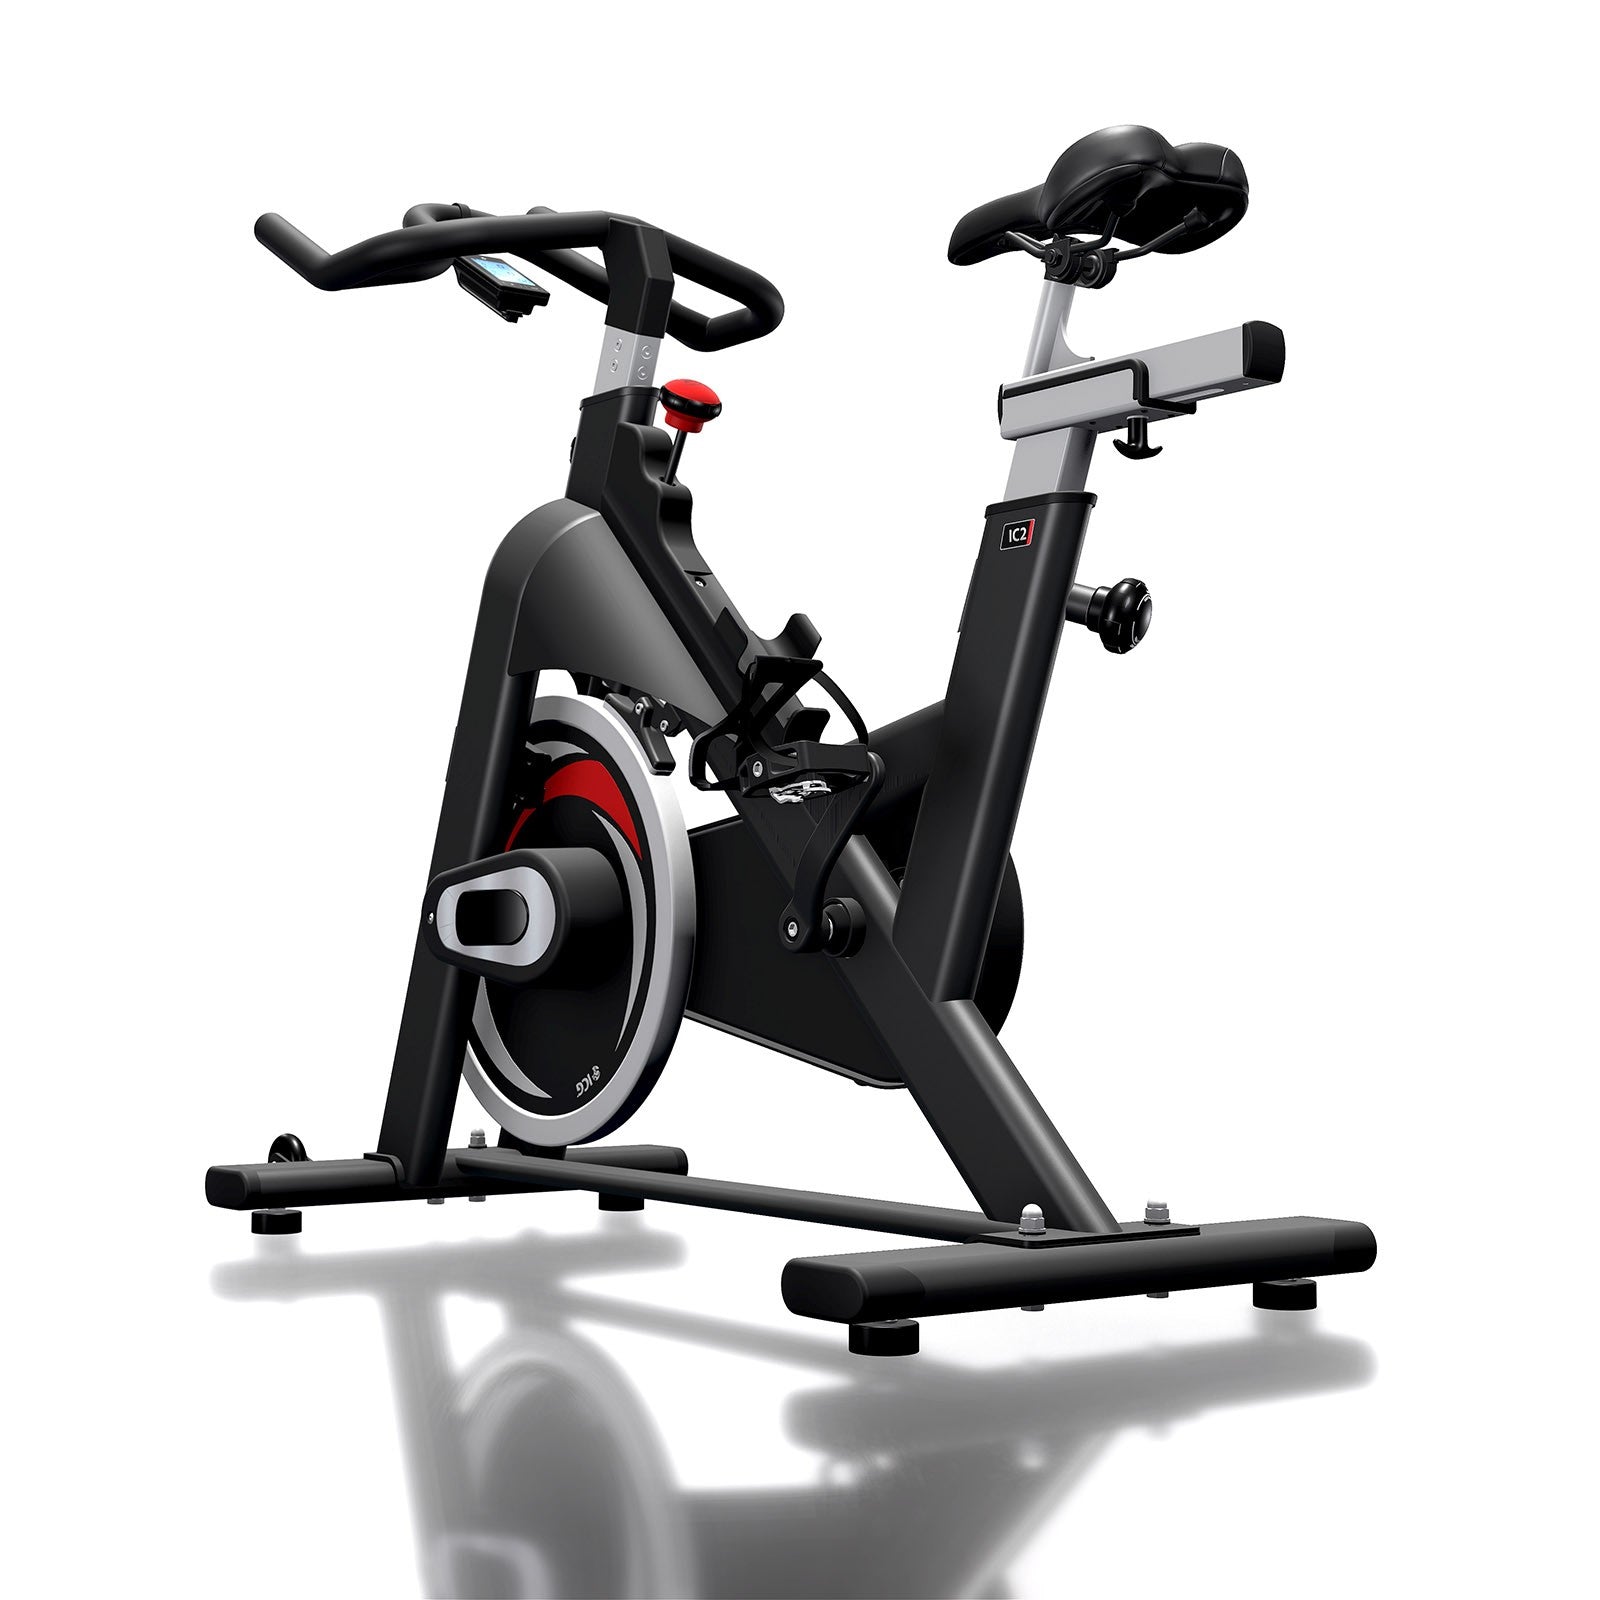 What Muscles Does An Exercise Bike Work